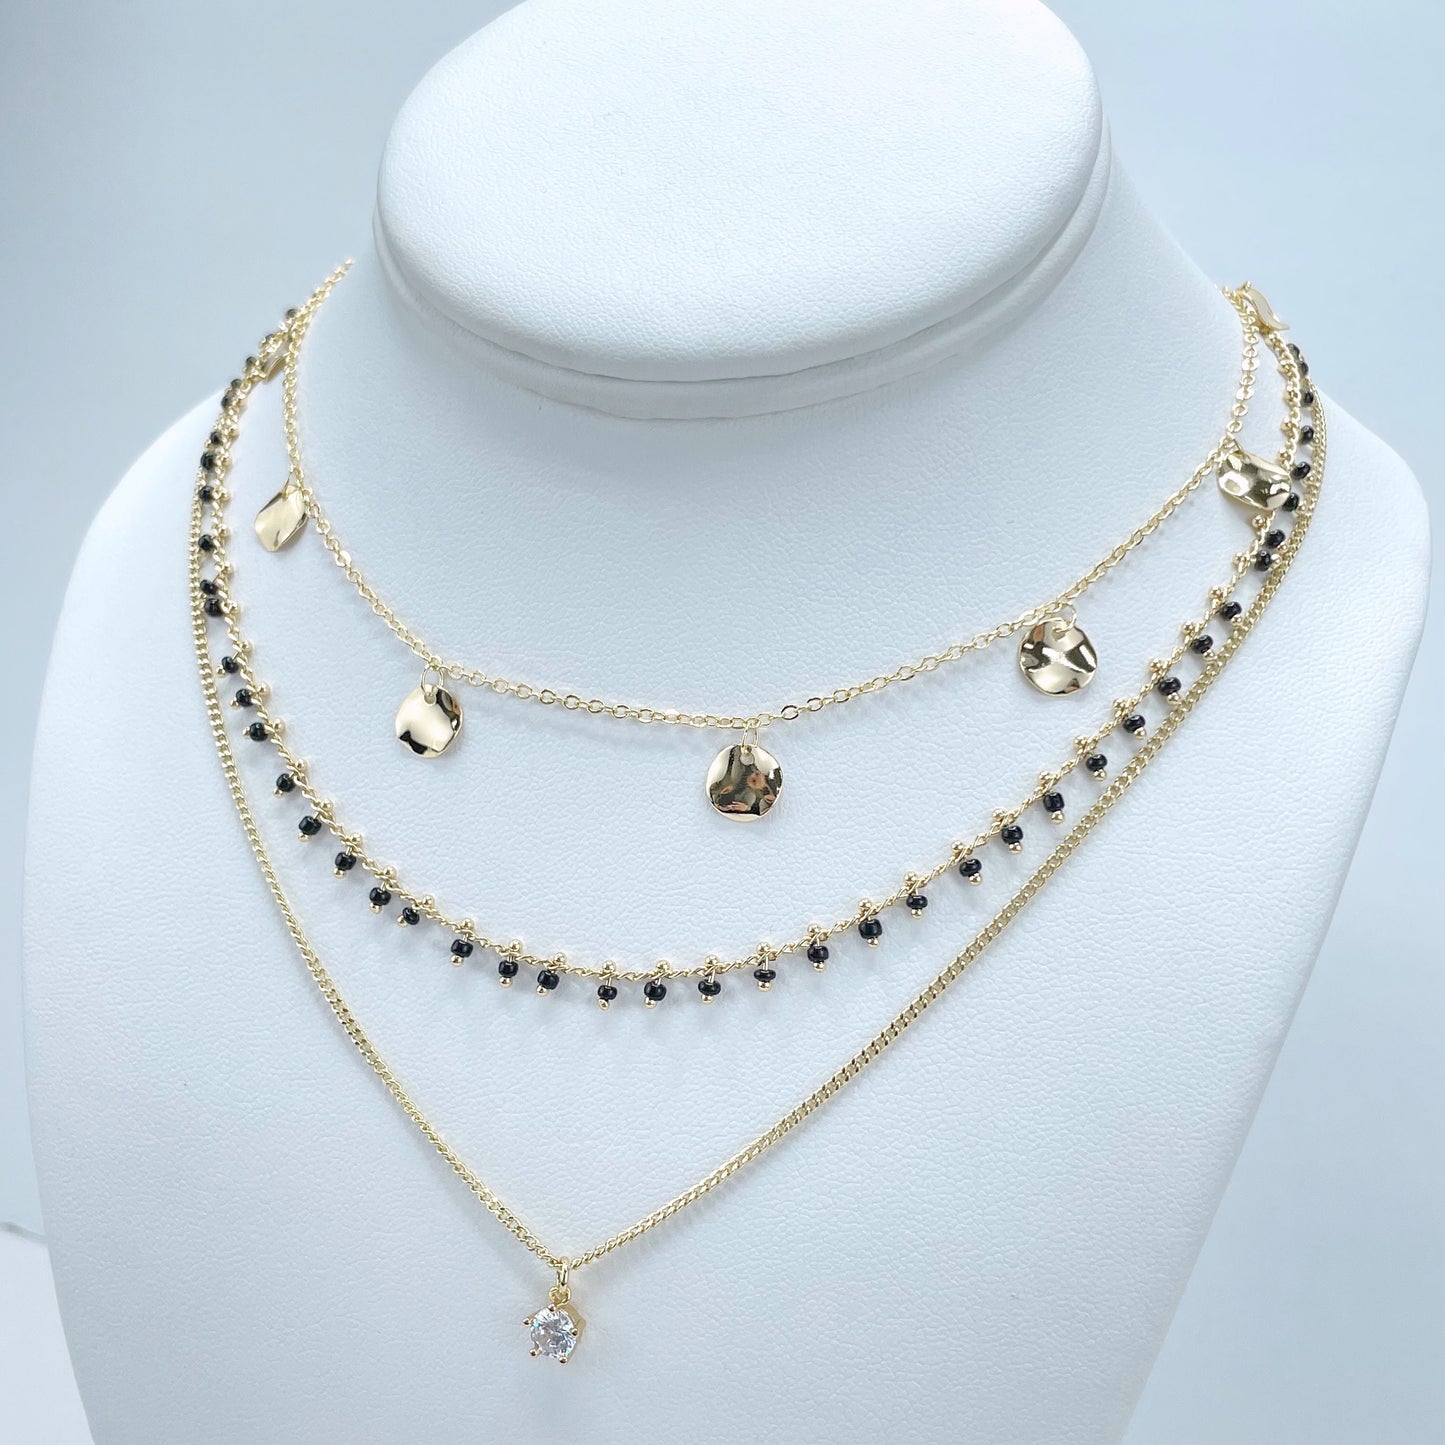 18k Gold Filled Set with 03 Necklaces, Round Gold Charms Neck, Paperclip Solitaire CZ and Black Beaded Necklace, Wholesale Jewelry Supplies